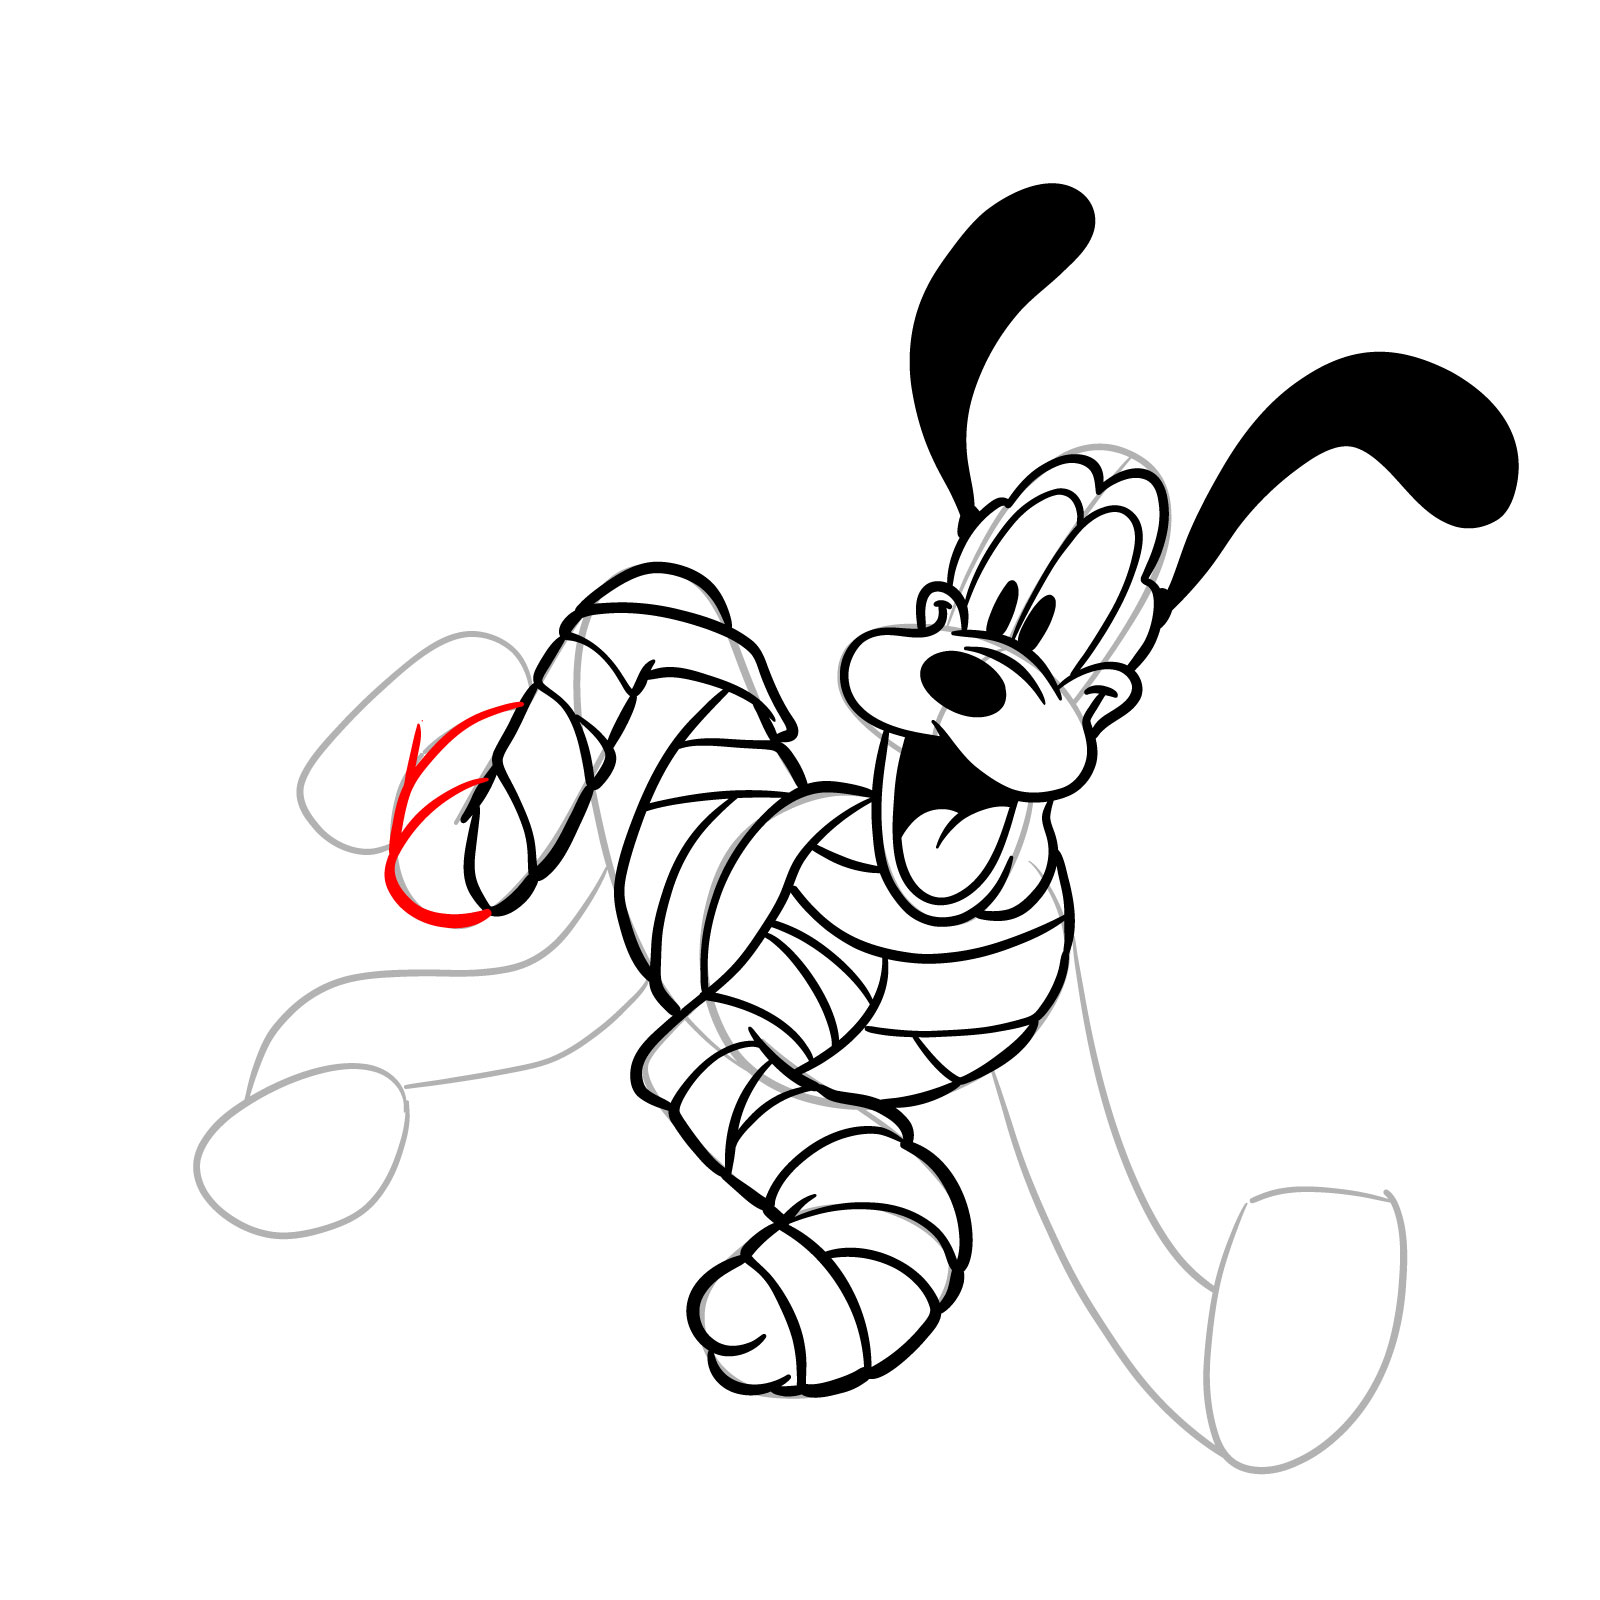 How to draw Halloween Pluto as a mummy - step 19